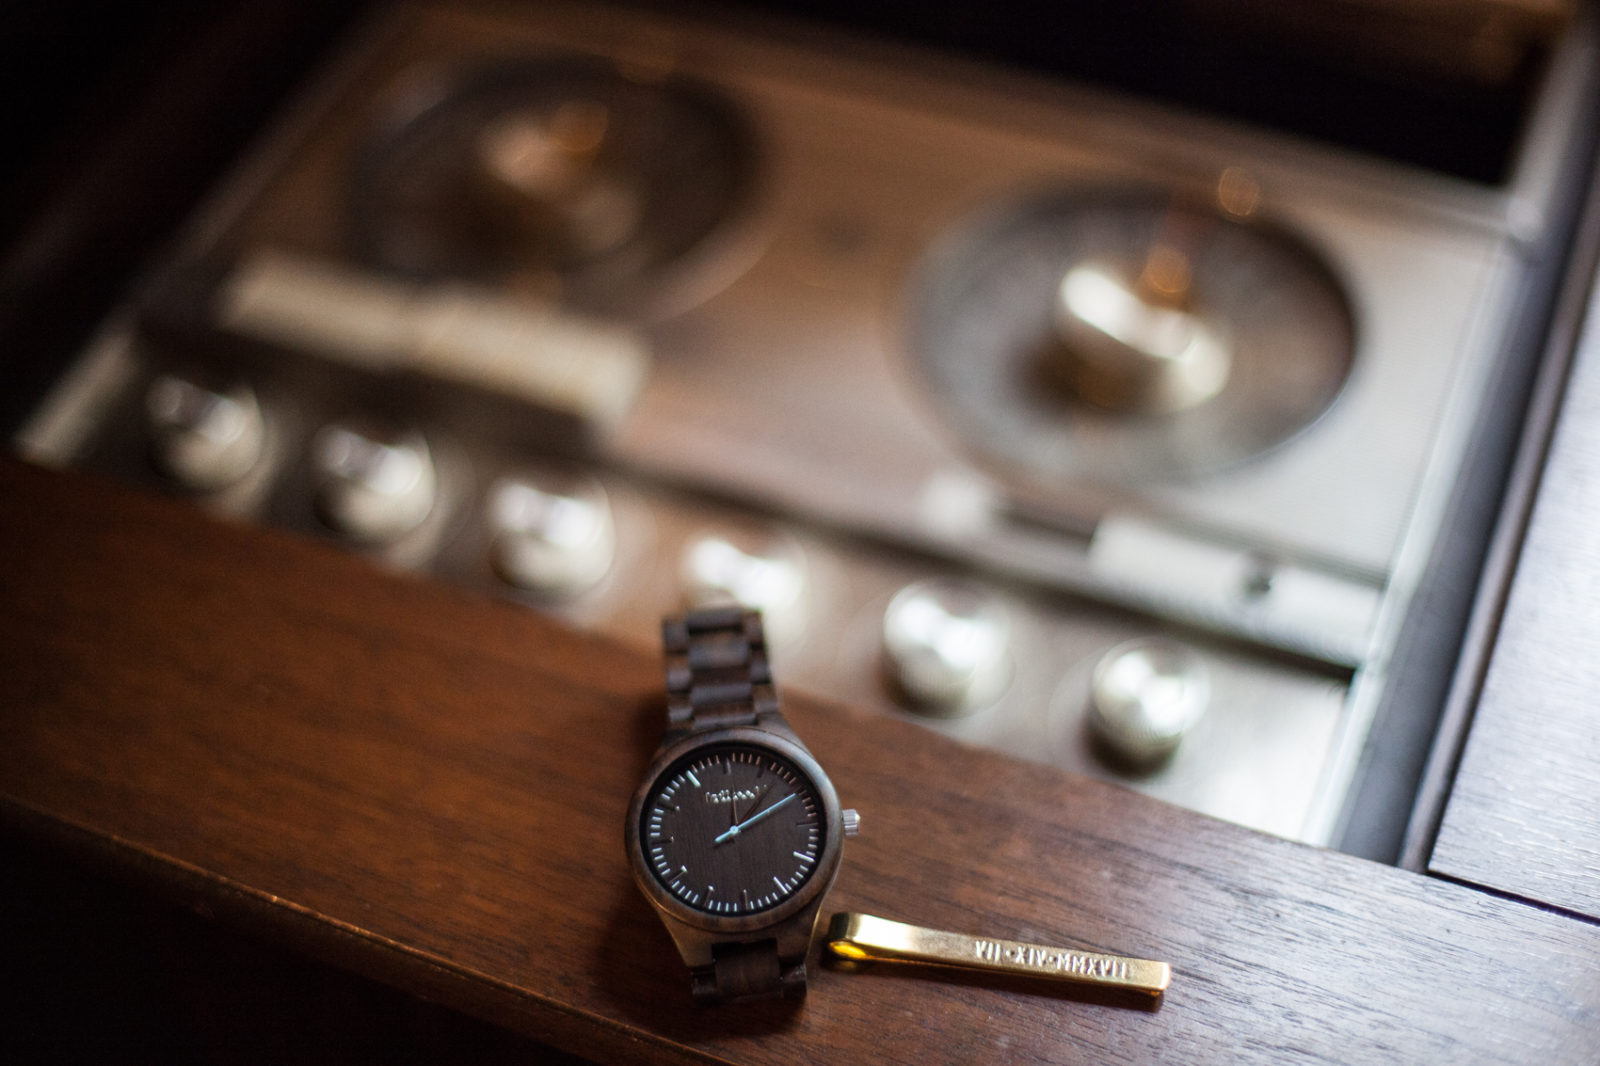 grooms watch and tie bar clip on top of vintage music player